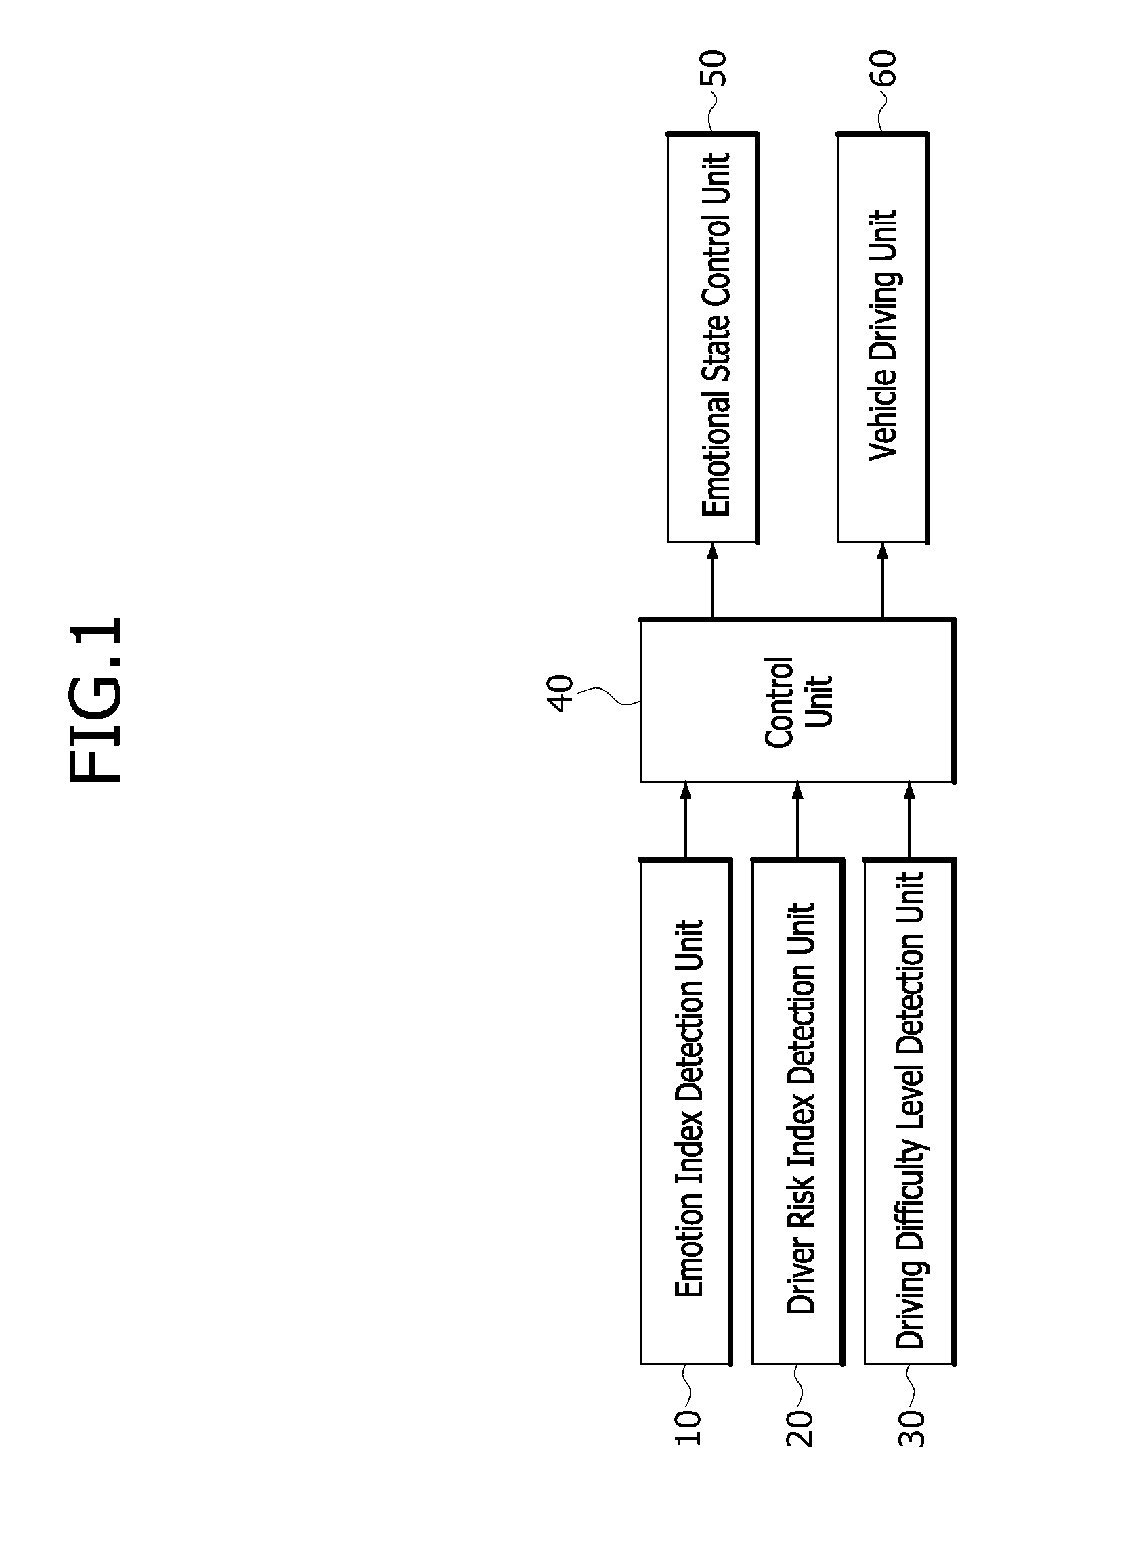 Safe driving support apparatus and method